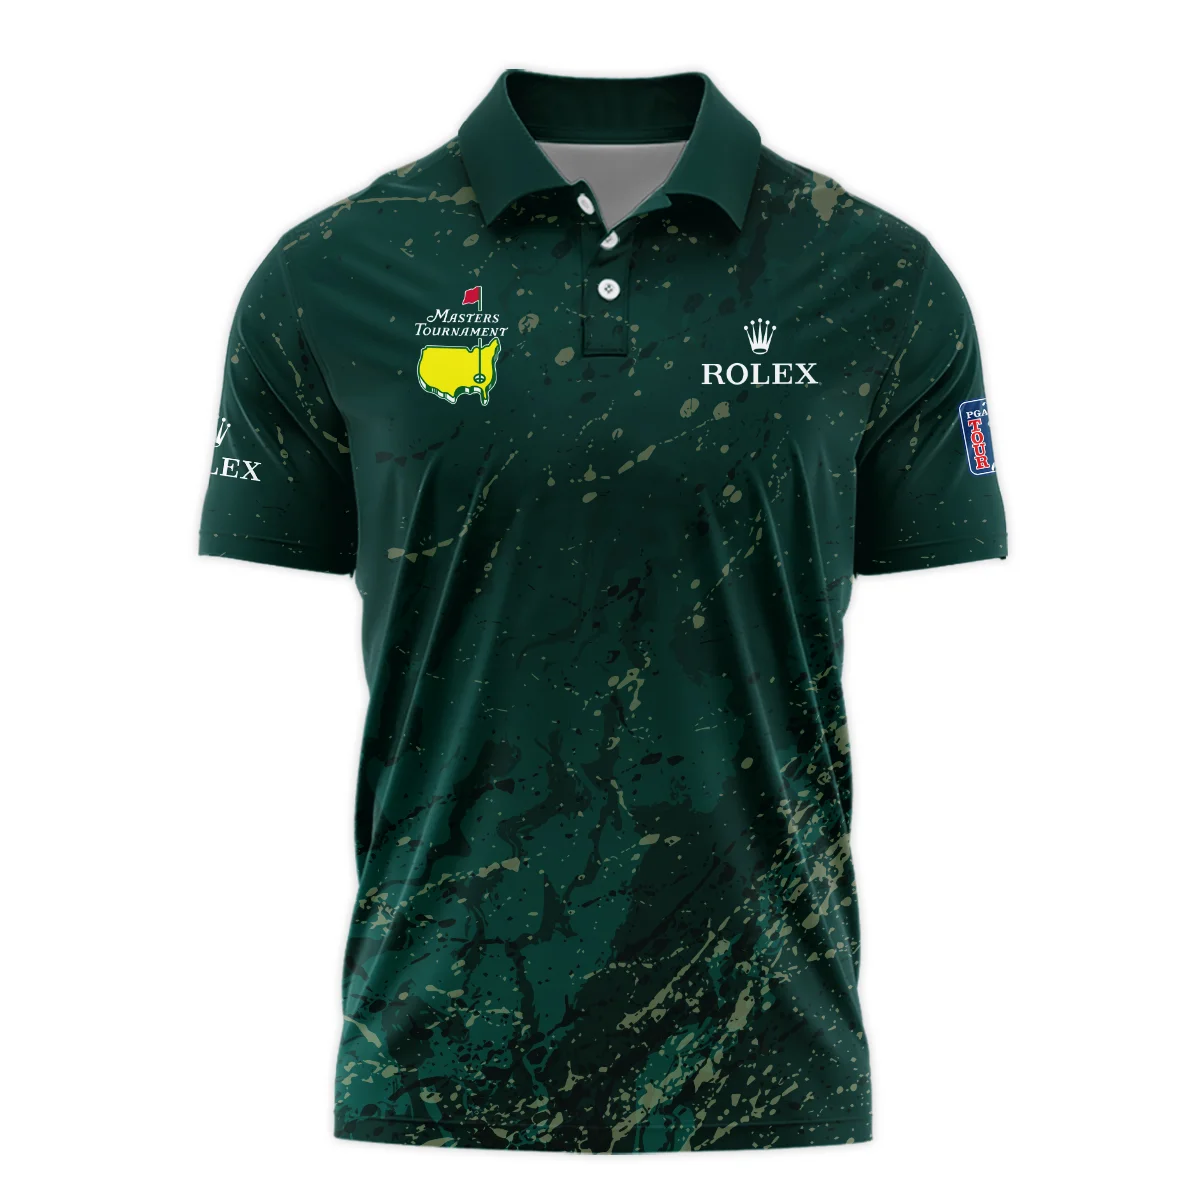 Old Cracked Texture With Gold Splash Paint Masters Tournament Rolex Polo Shirt Style Classic Polo Shirt For Men